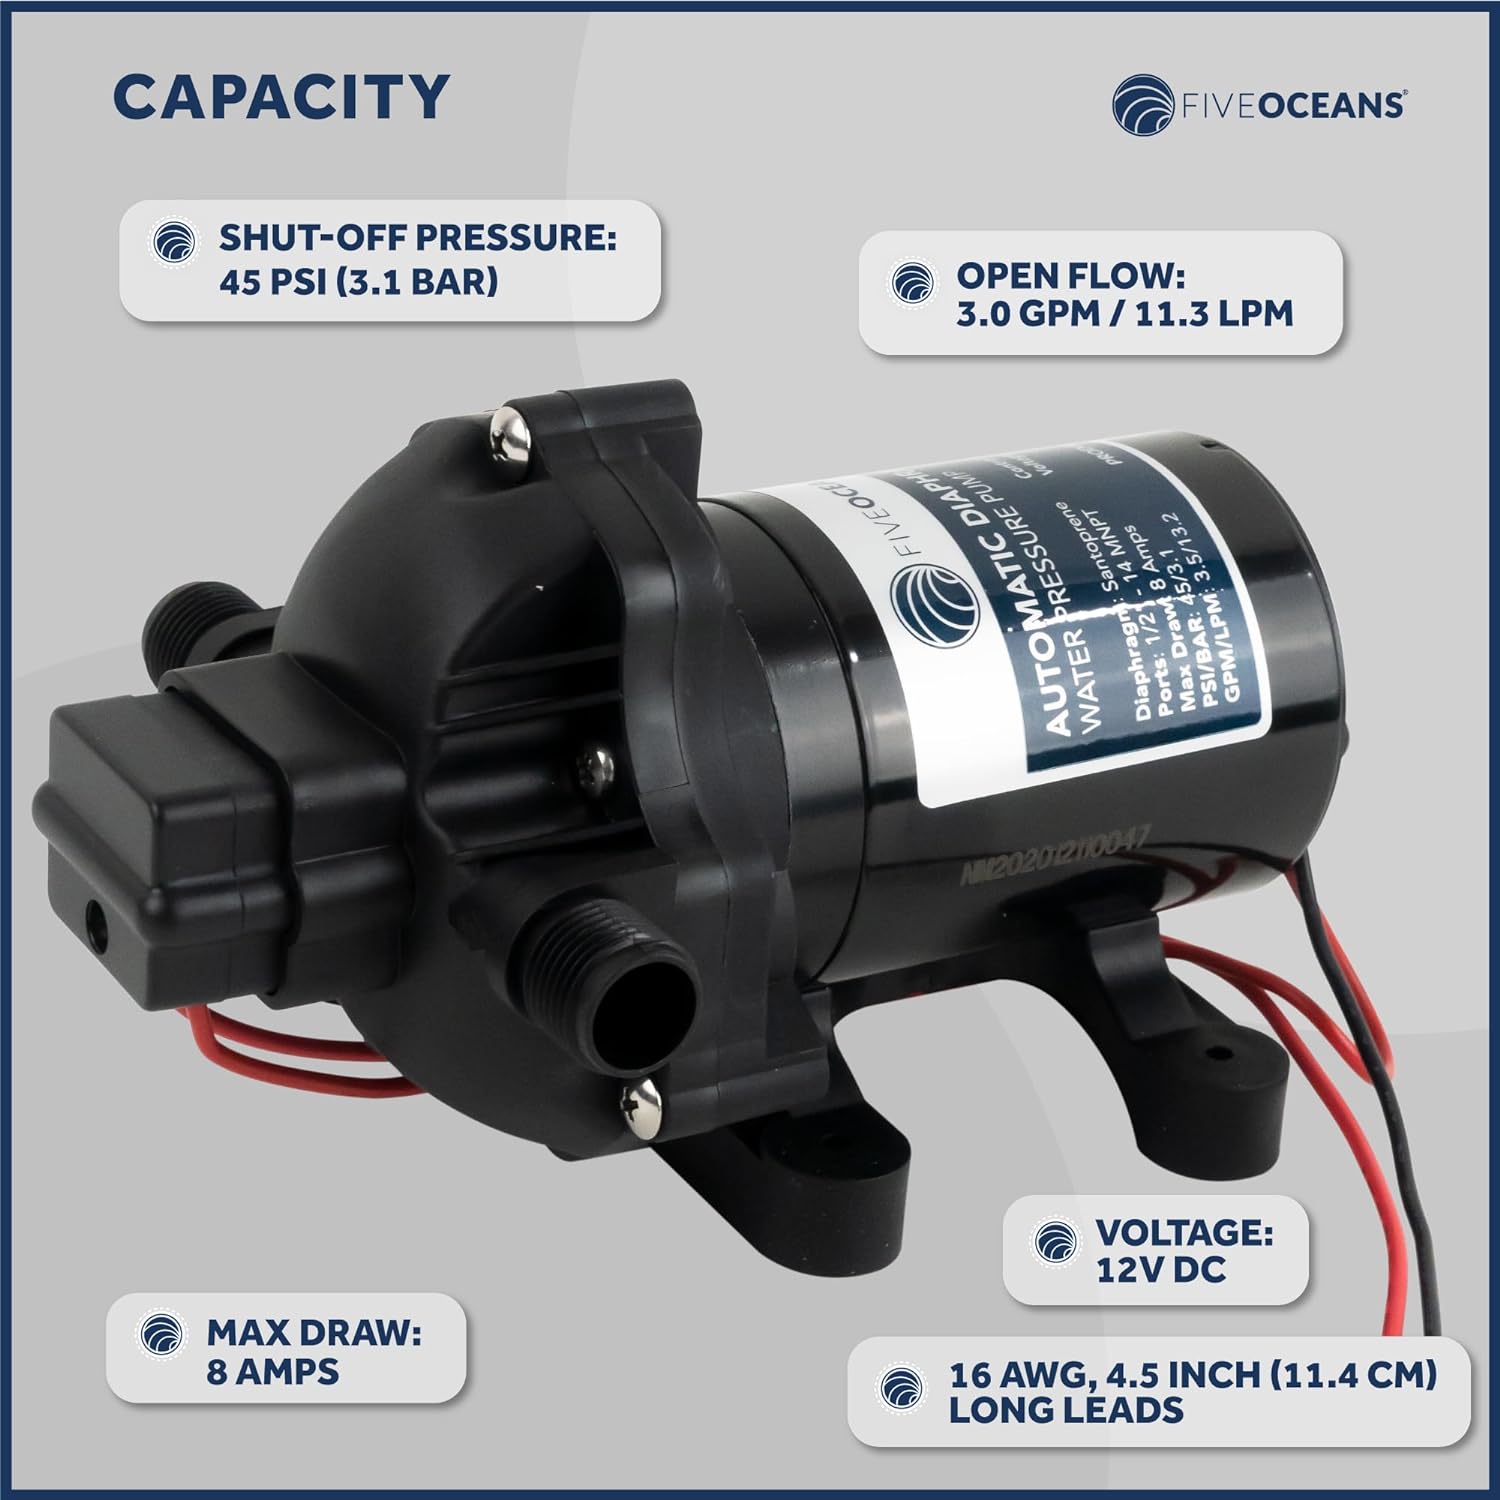 12 volts Automatic Diaphragm Water Pressure Pump, Up to 45PSI / 3.0 GPM, Self-Priming, Run Dry Safe